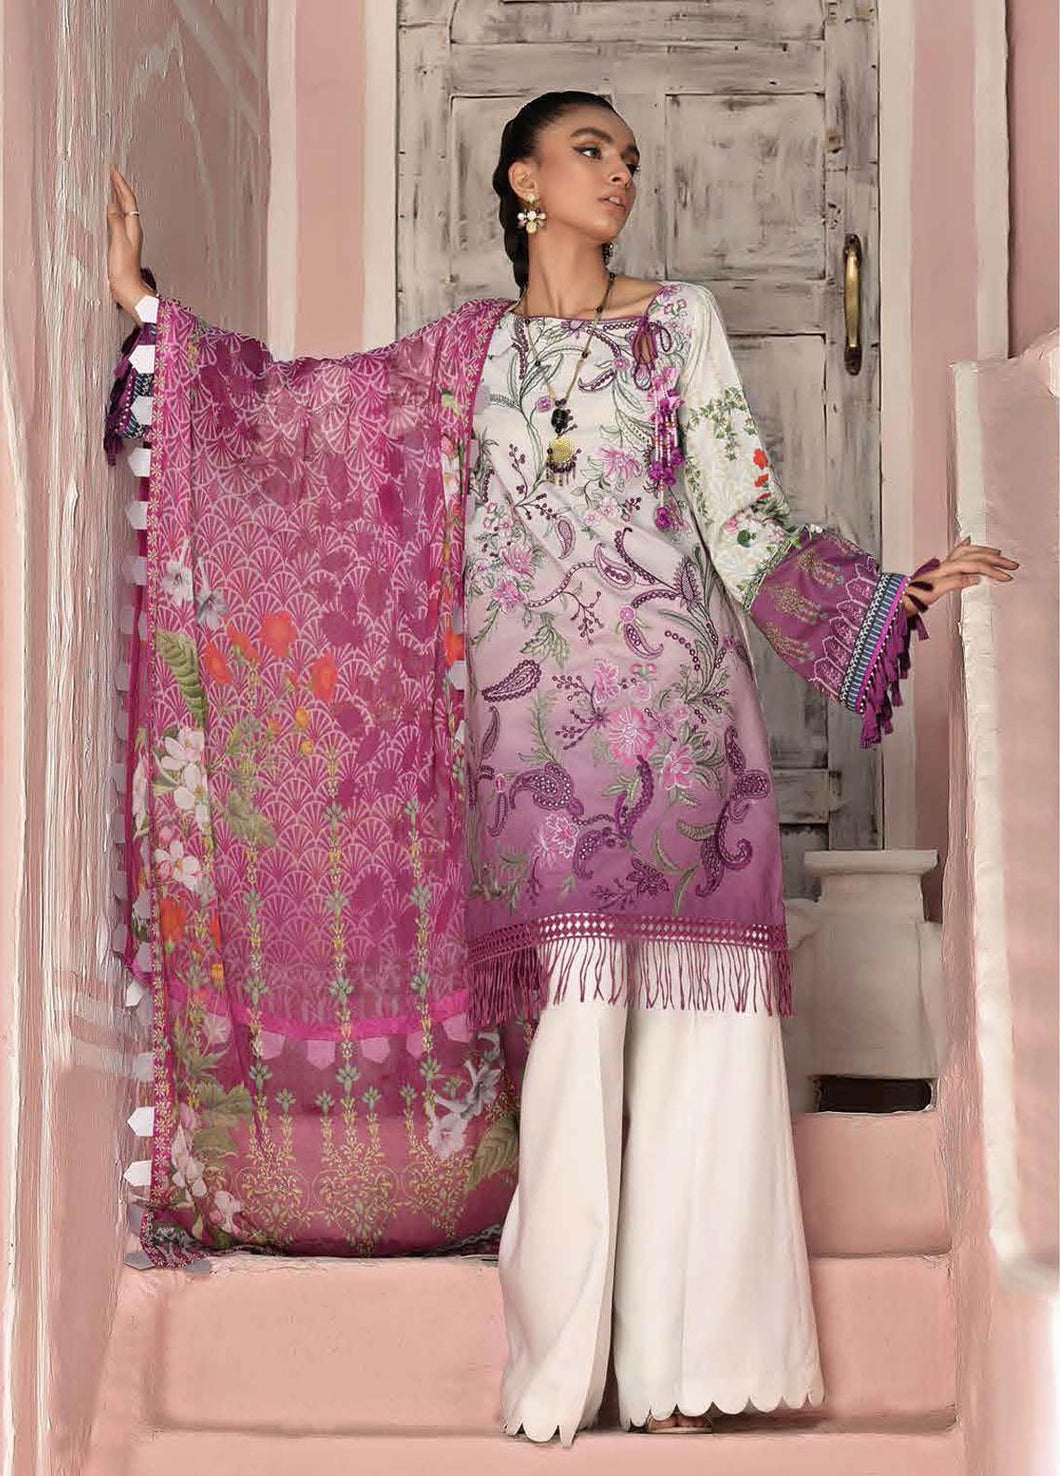 Buy Roheenaz Summer Collection 2021 6B Purple Lawn dress from our official website. We have wide range of PAKISTANI  DRESSES ONLINE IN UK with stitching facilities. These summer days get your dress as like PAKISTANI BOUTIQUE DRESSES. We have Brands such as MARIA B ASIM JOFA Get your dress in UK USA from Lebaasonline